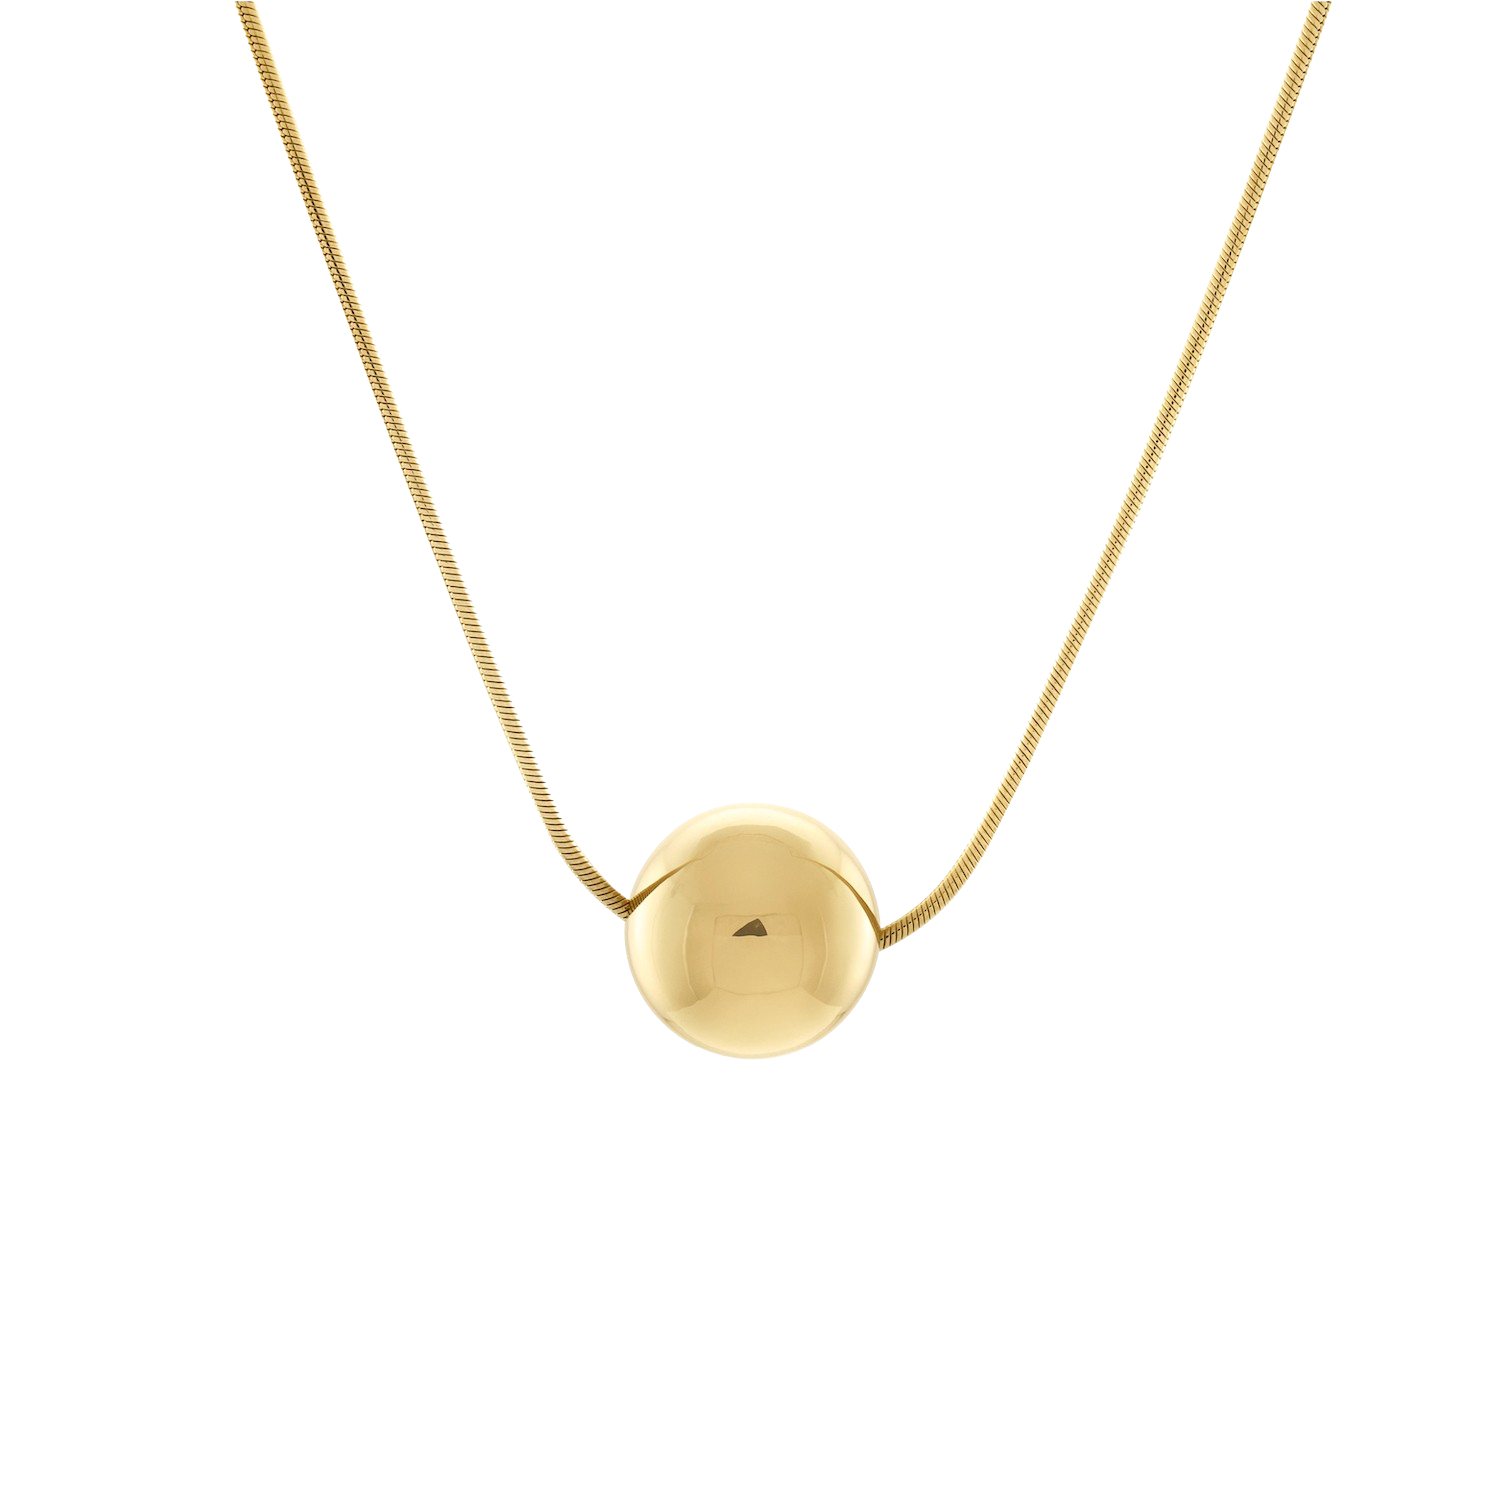 Josephine_Orb_Necklace__Gold_Vermeil__1_-removebg.png